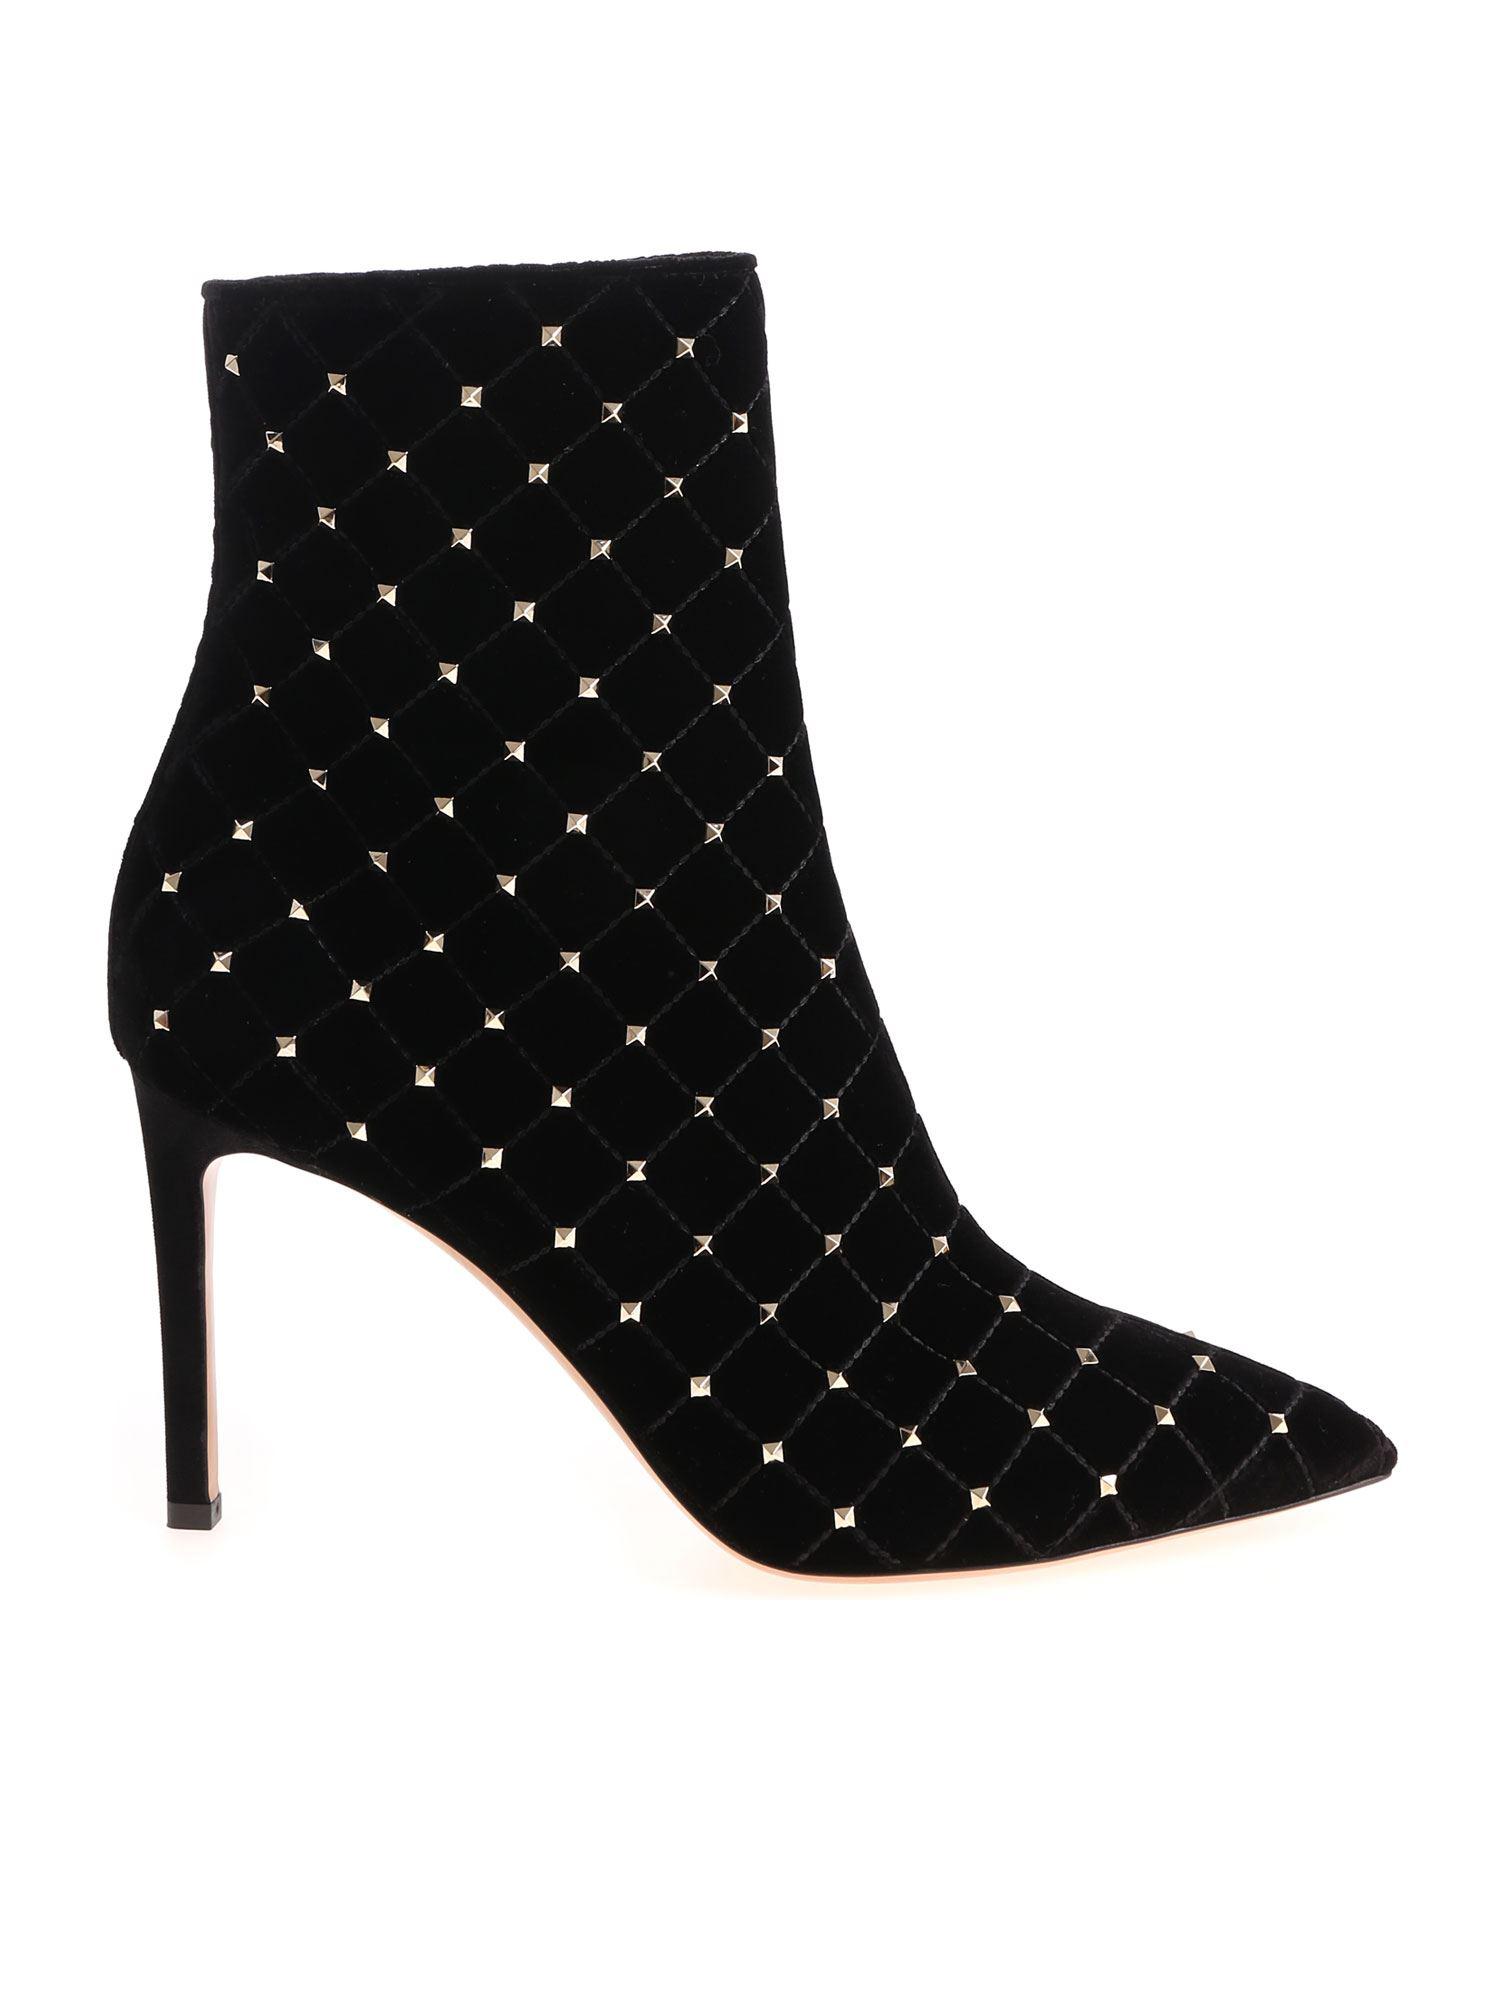 Black Quilted Ankle Boots With Studs - Lyst